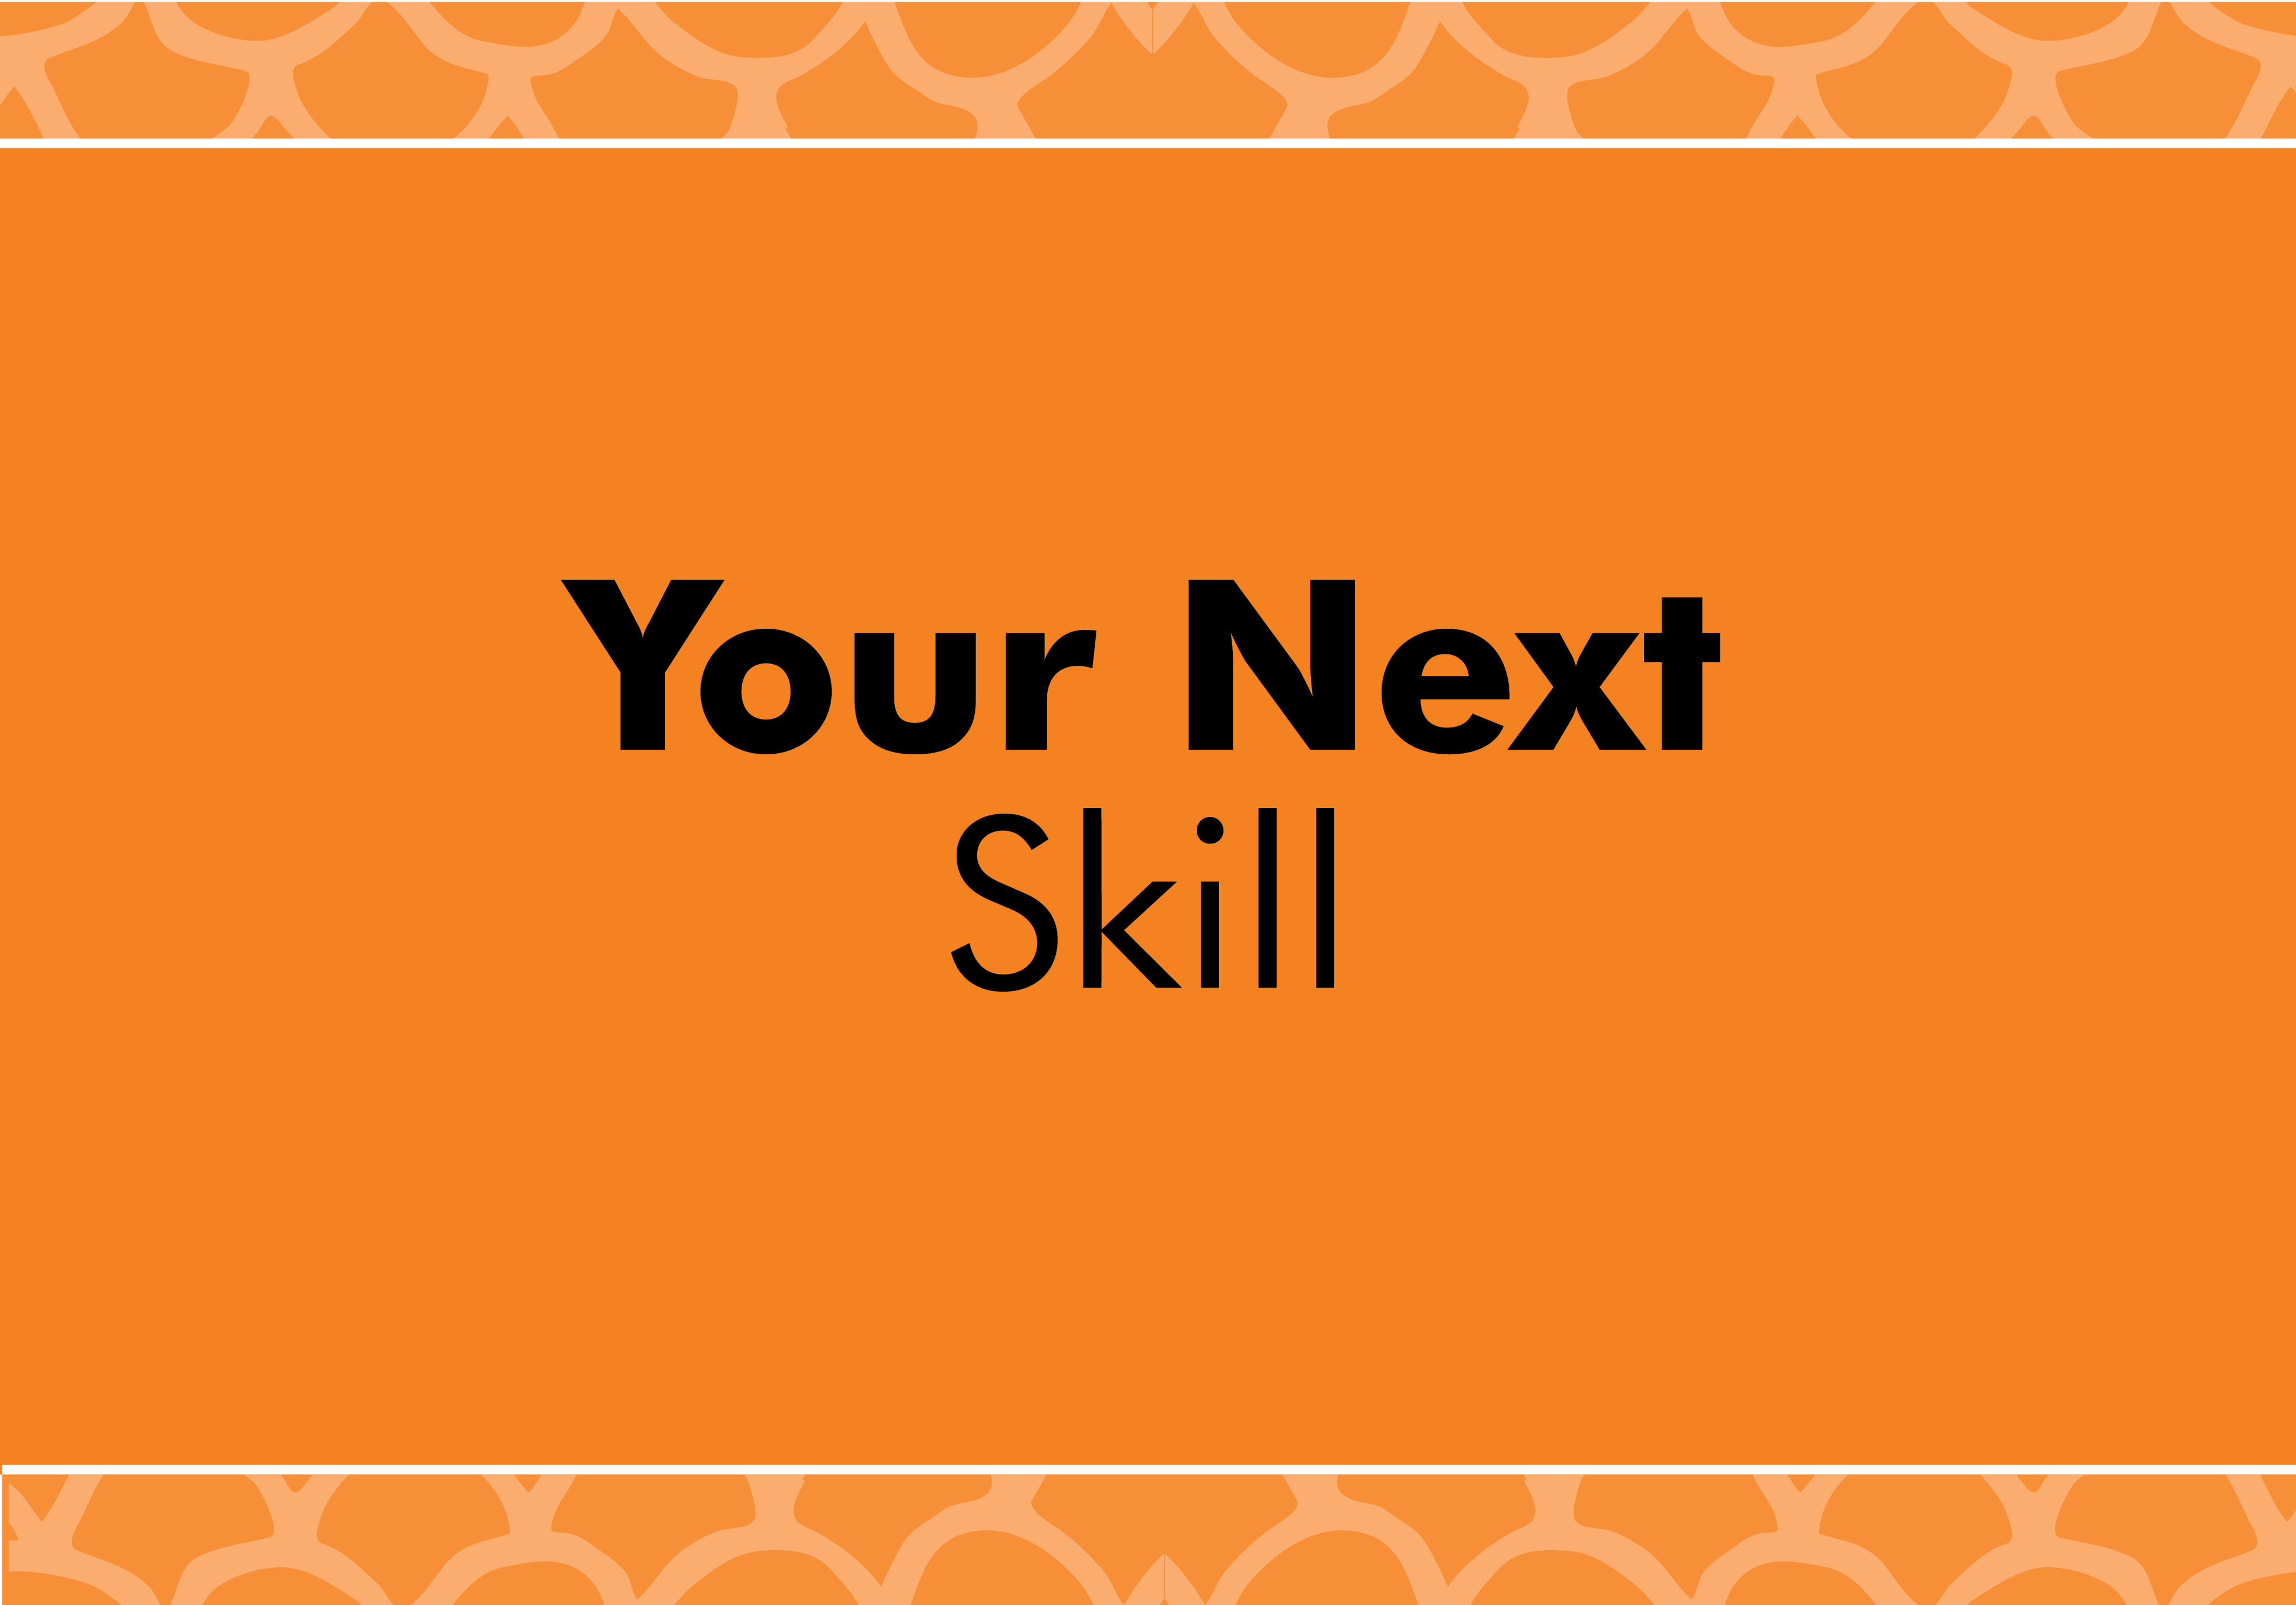 Your next skill